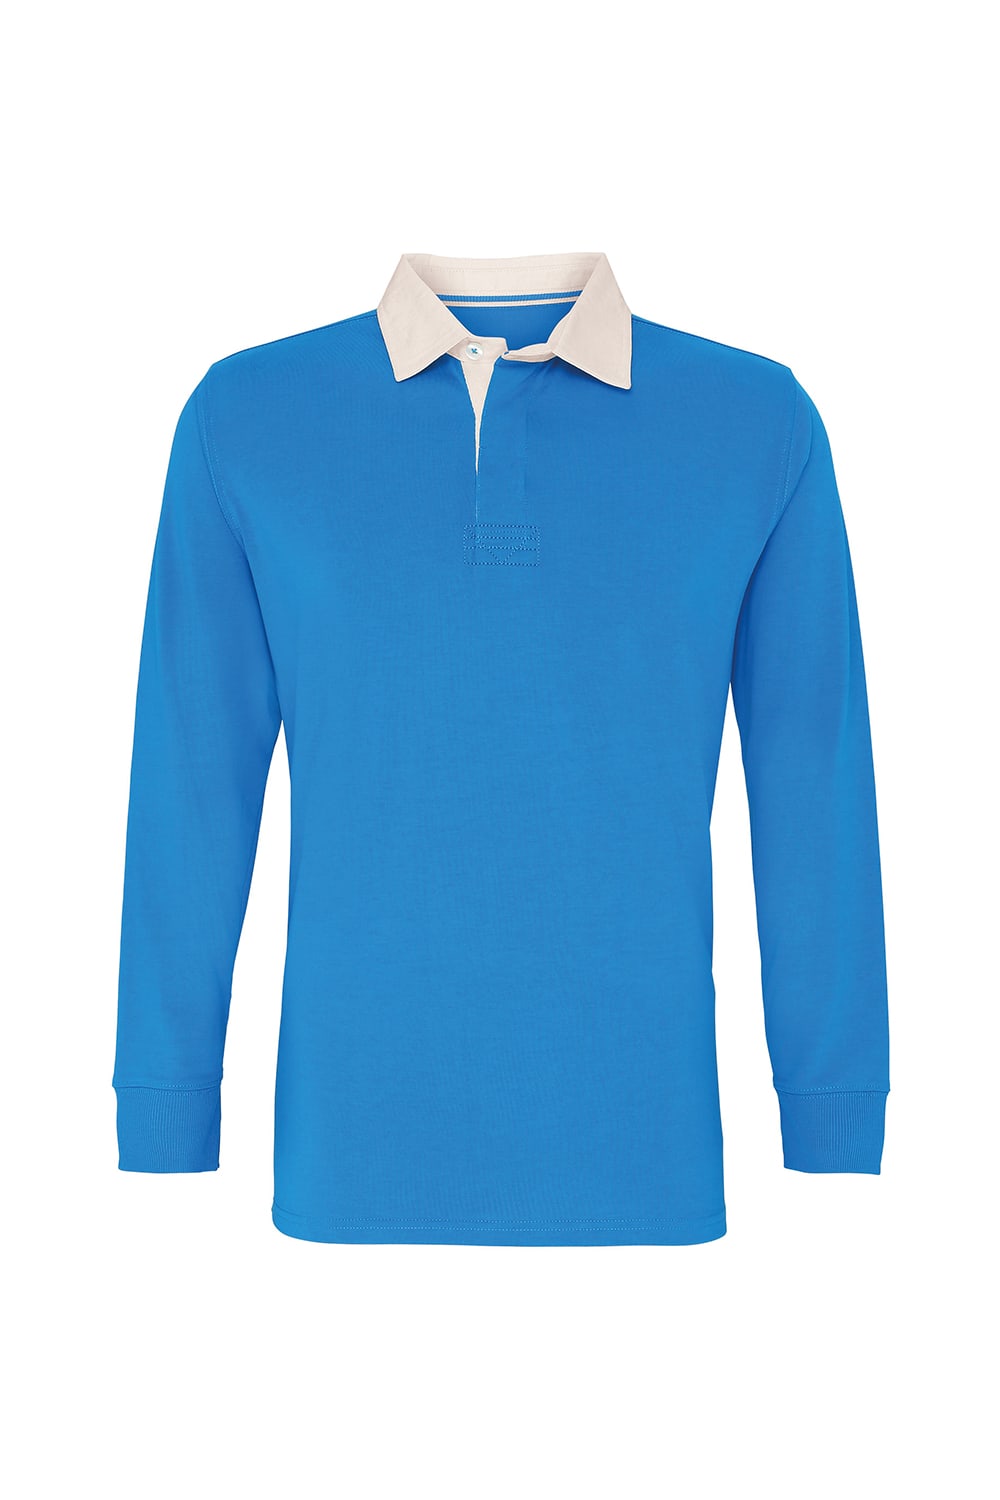 Asquith & Fox Mens Classic Fit Long Sleeve Vintage Rugby Shirt (Sapphire)